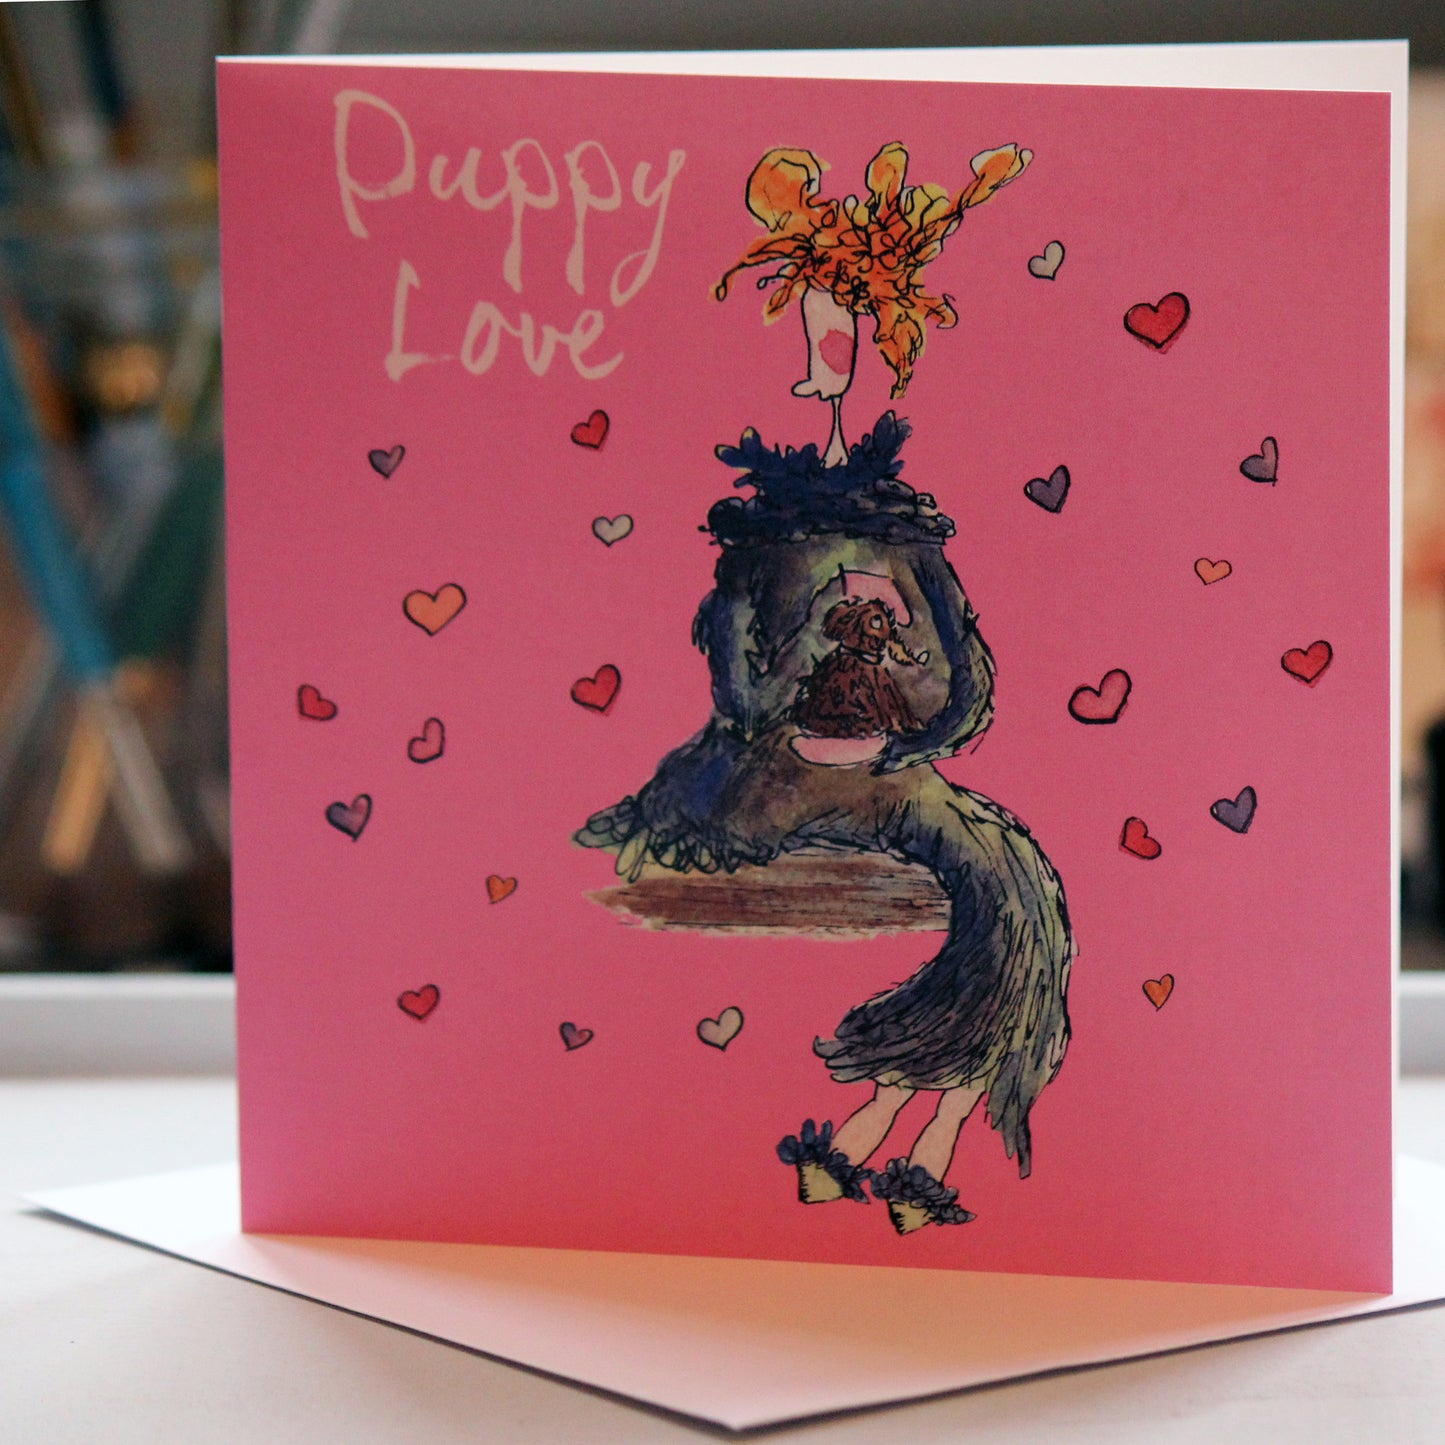 "Puppy Love" Greeting Card - damedoodah.com  - Art and Design by Katie Rudge 